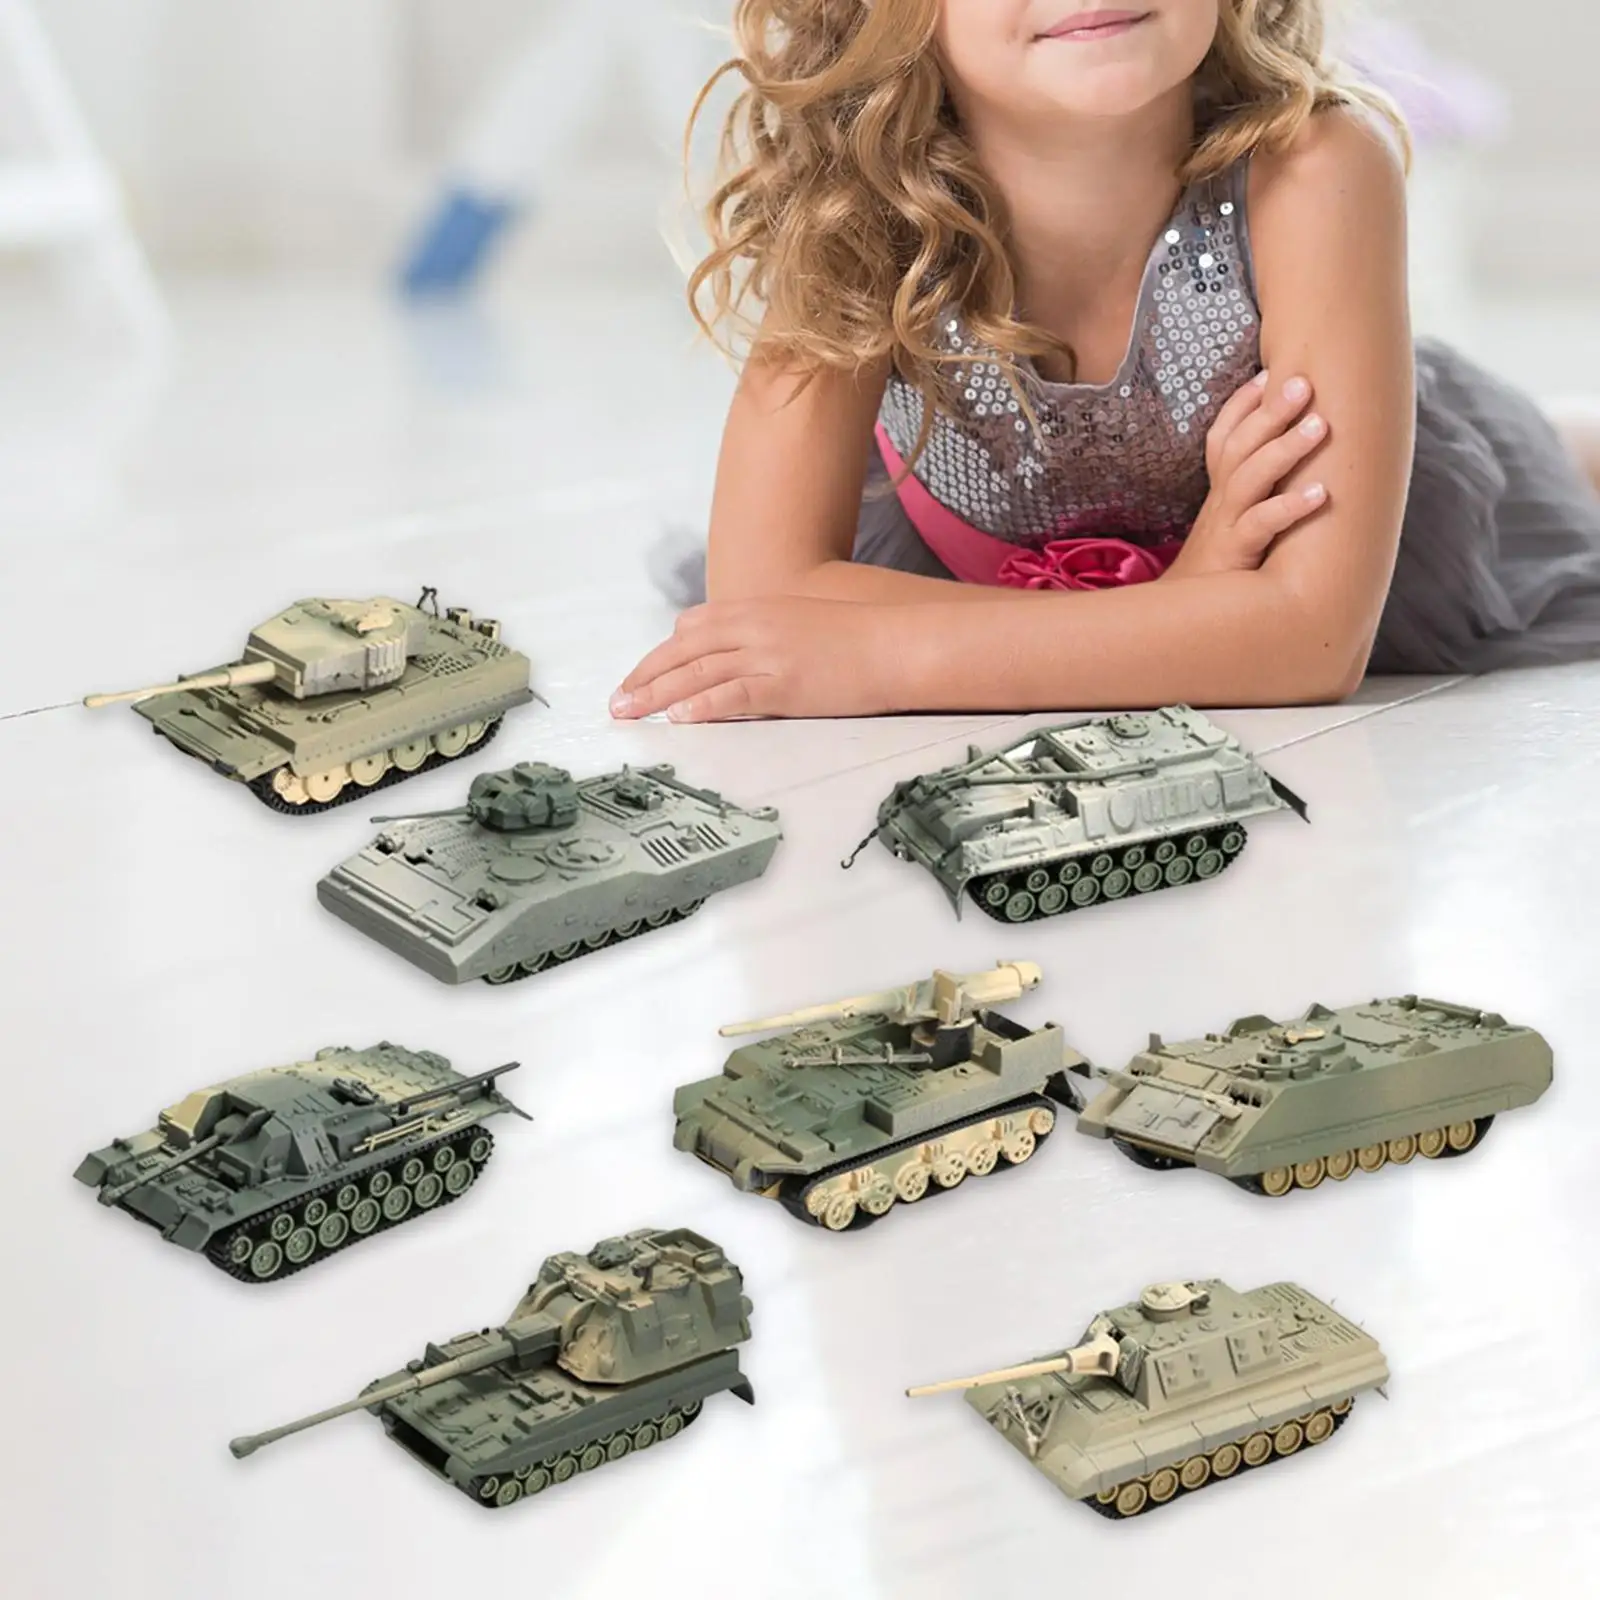 8 Pieces Static Tanks Building Kits Decoration Collectibles for Boys Girls